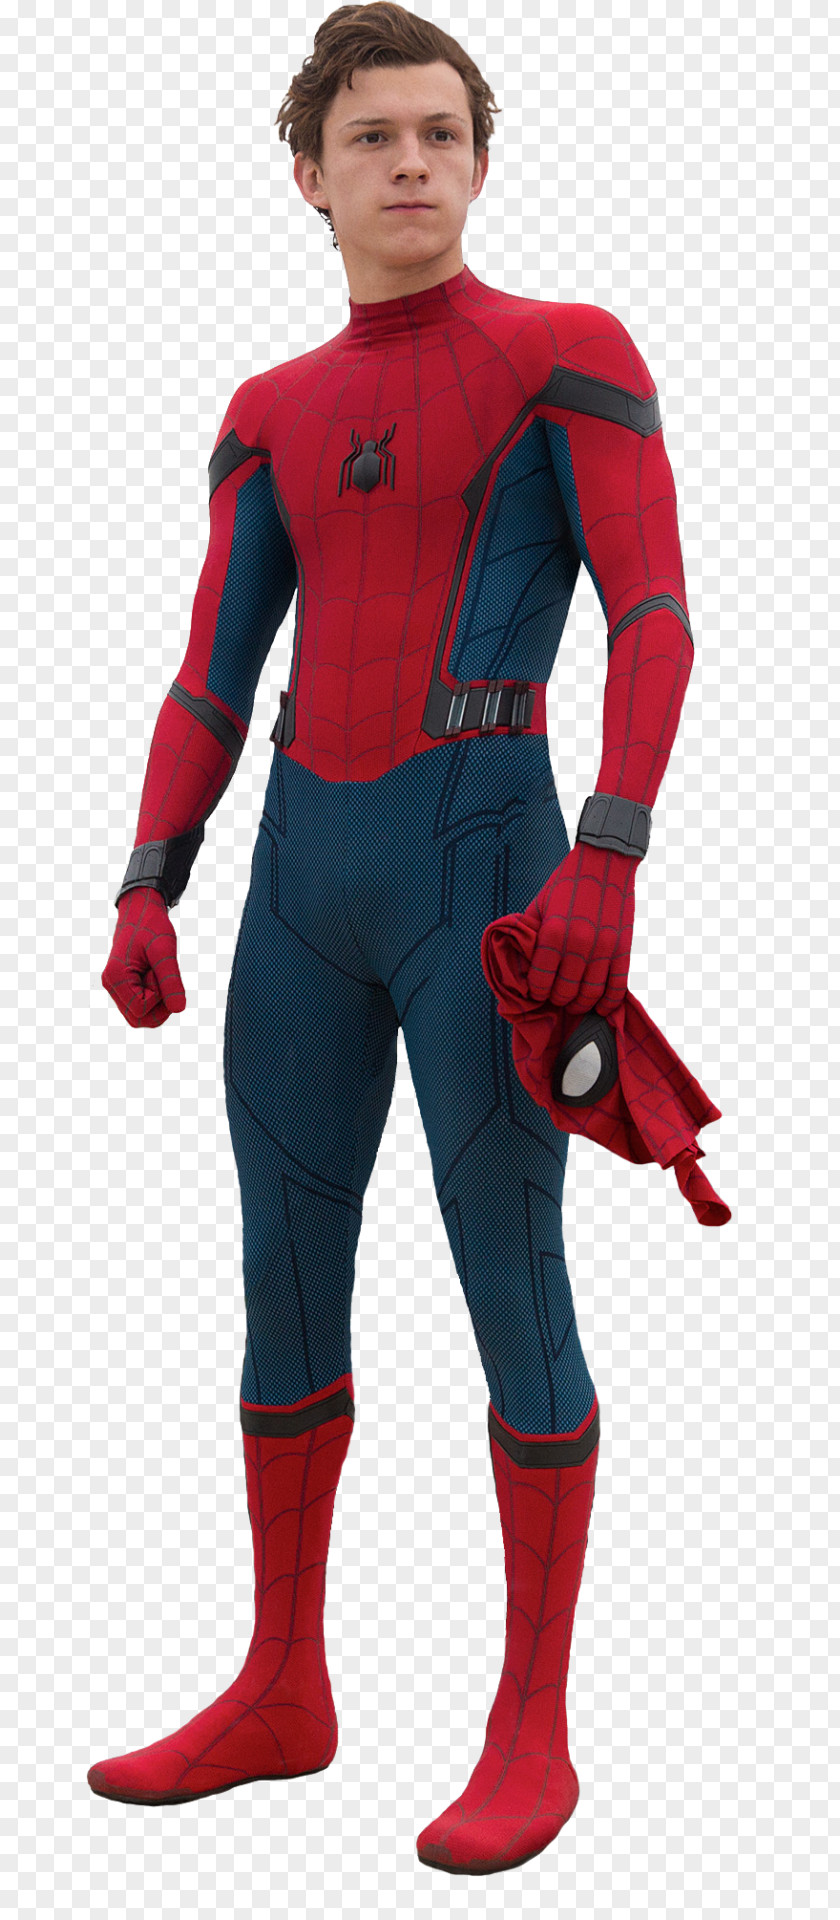 Daredevil Tom Holland Spider-Man: Homecoming Film Series YouTube PNG